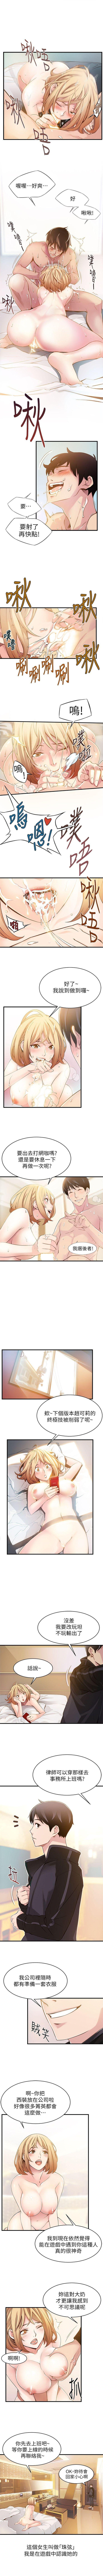 Twinks 弱點 1-91 官方中文（連載中） White - Page 3